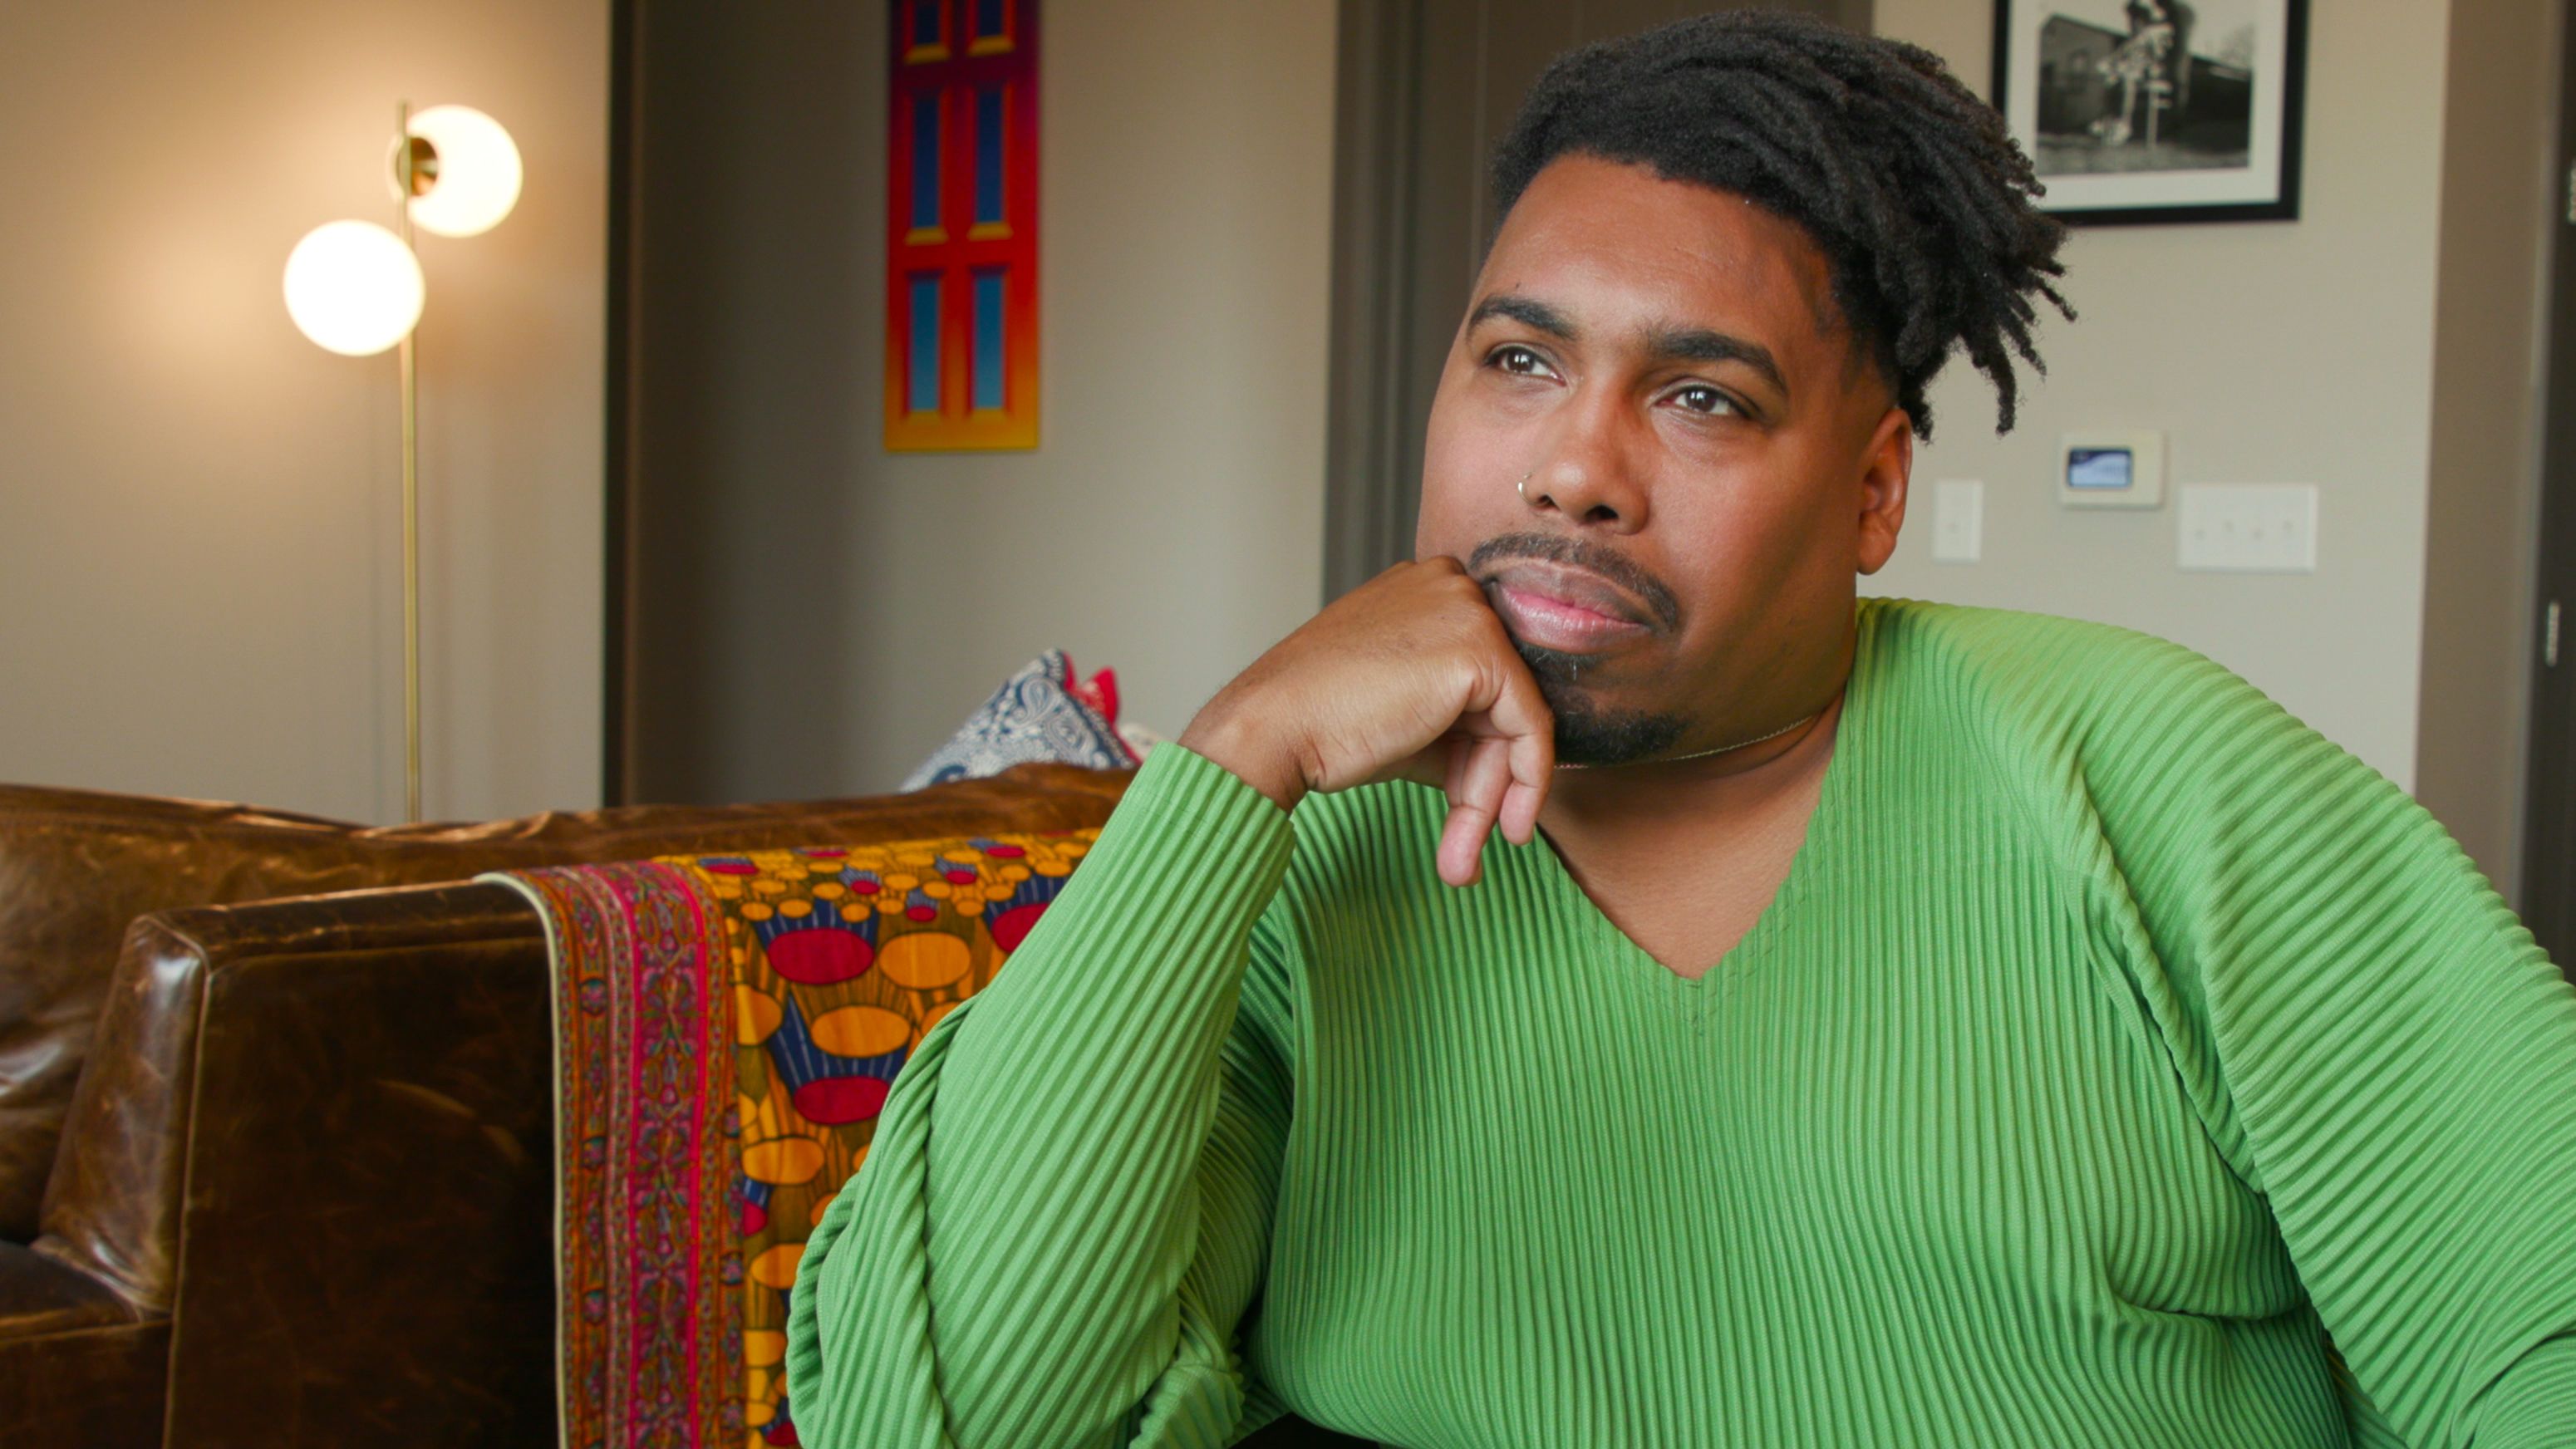 A Black man in a green sweater rests his chin on his hand.